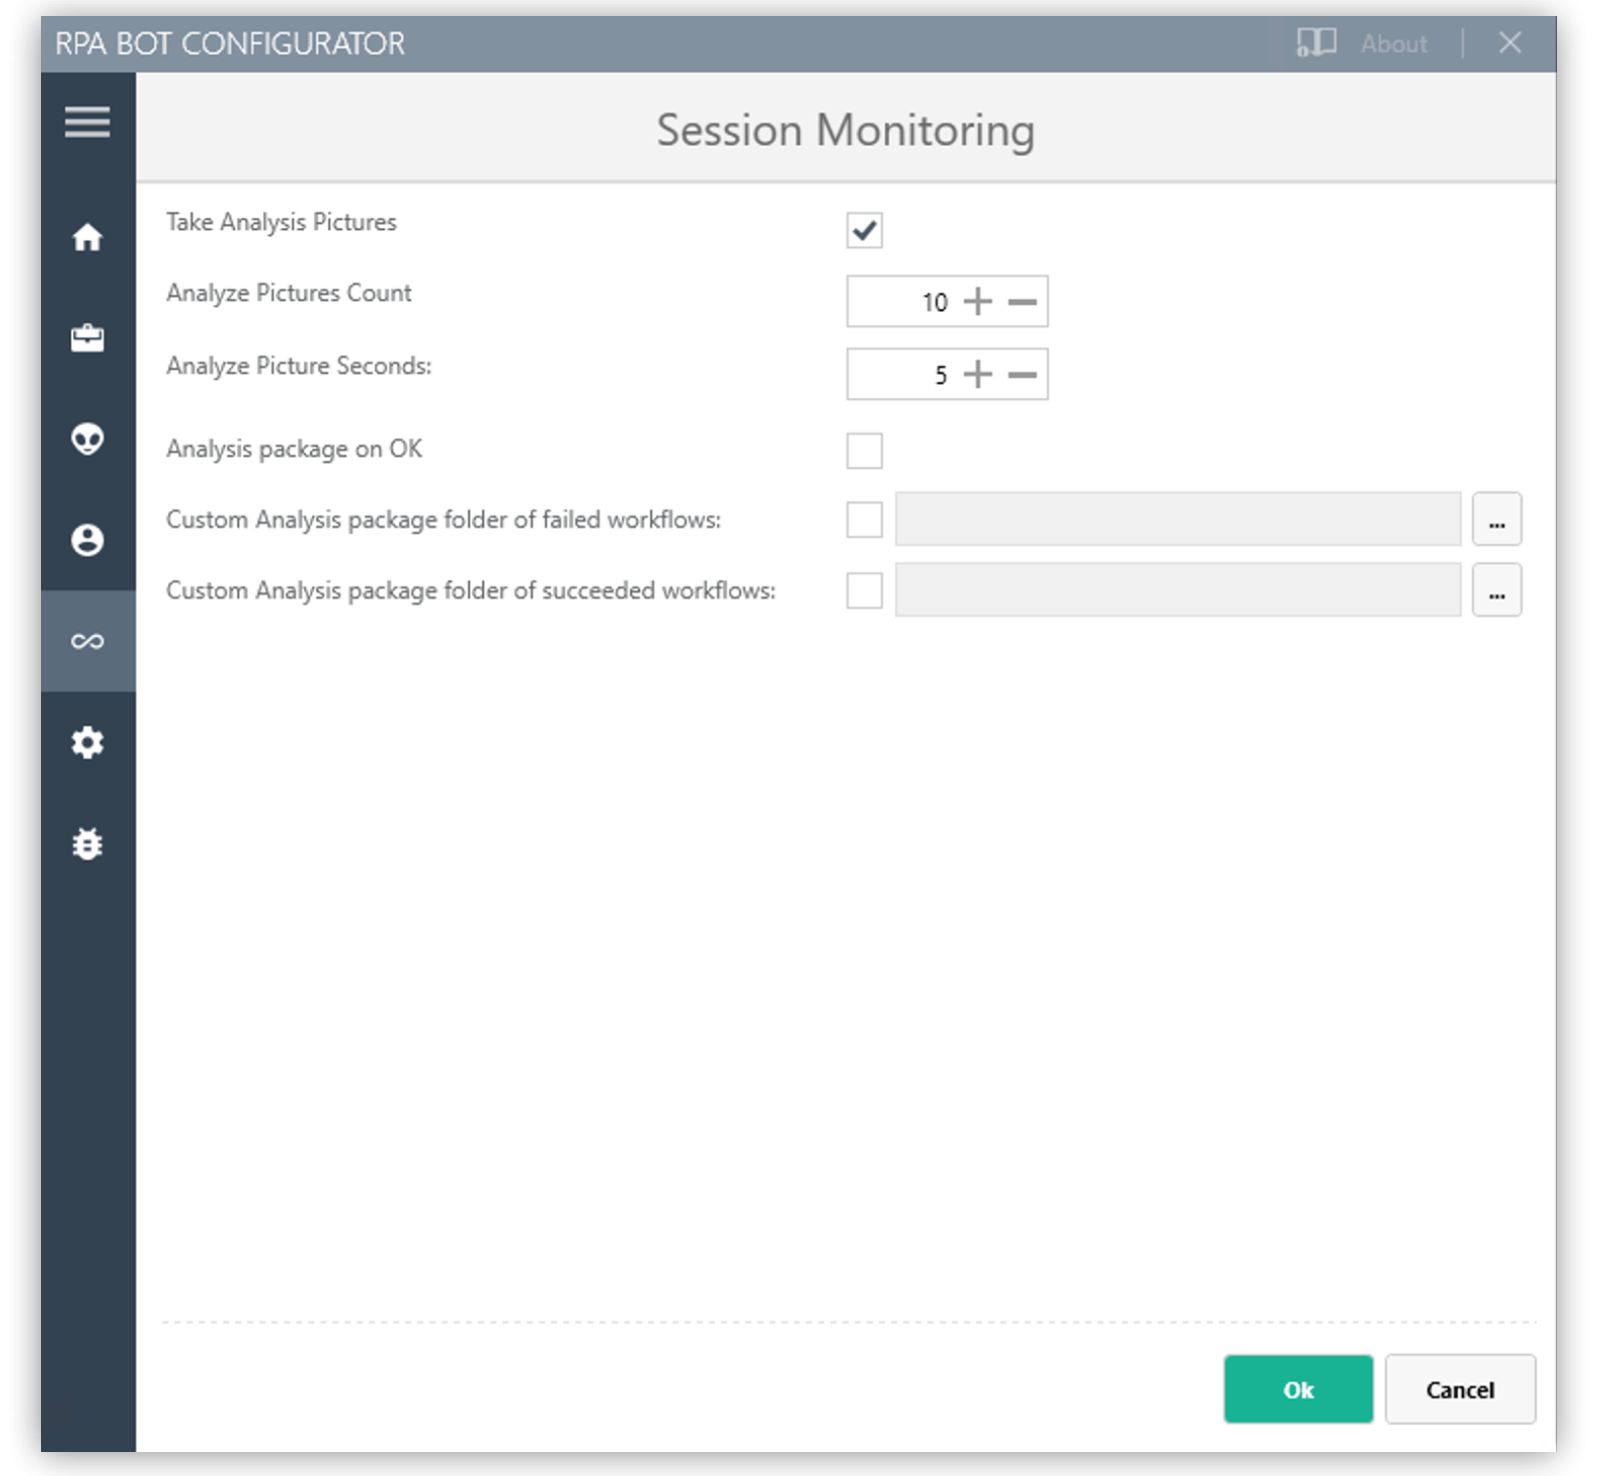 The RPA Bot Configurator application showing the Session Monitoring settings panel